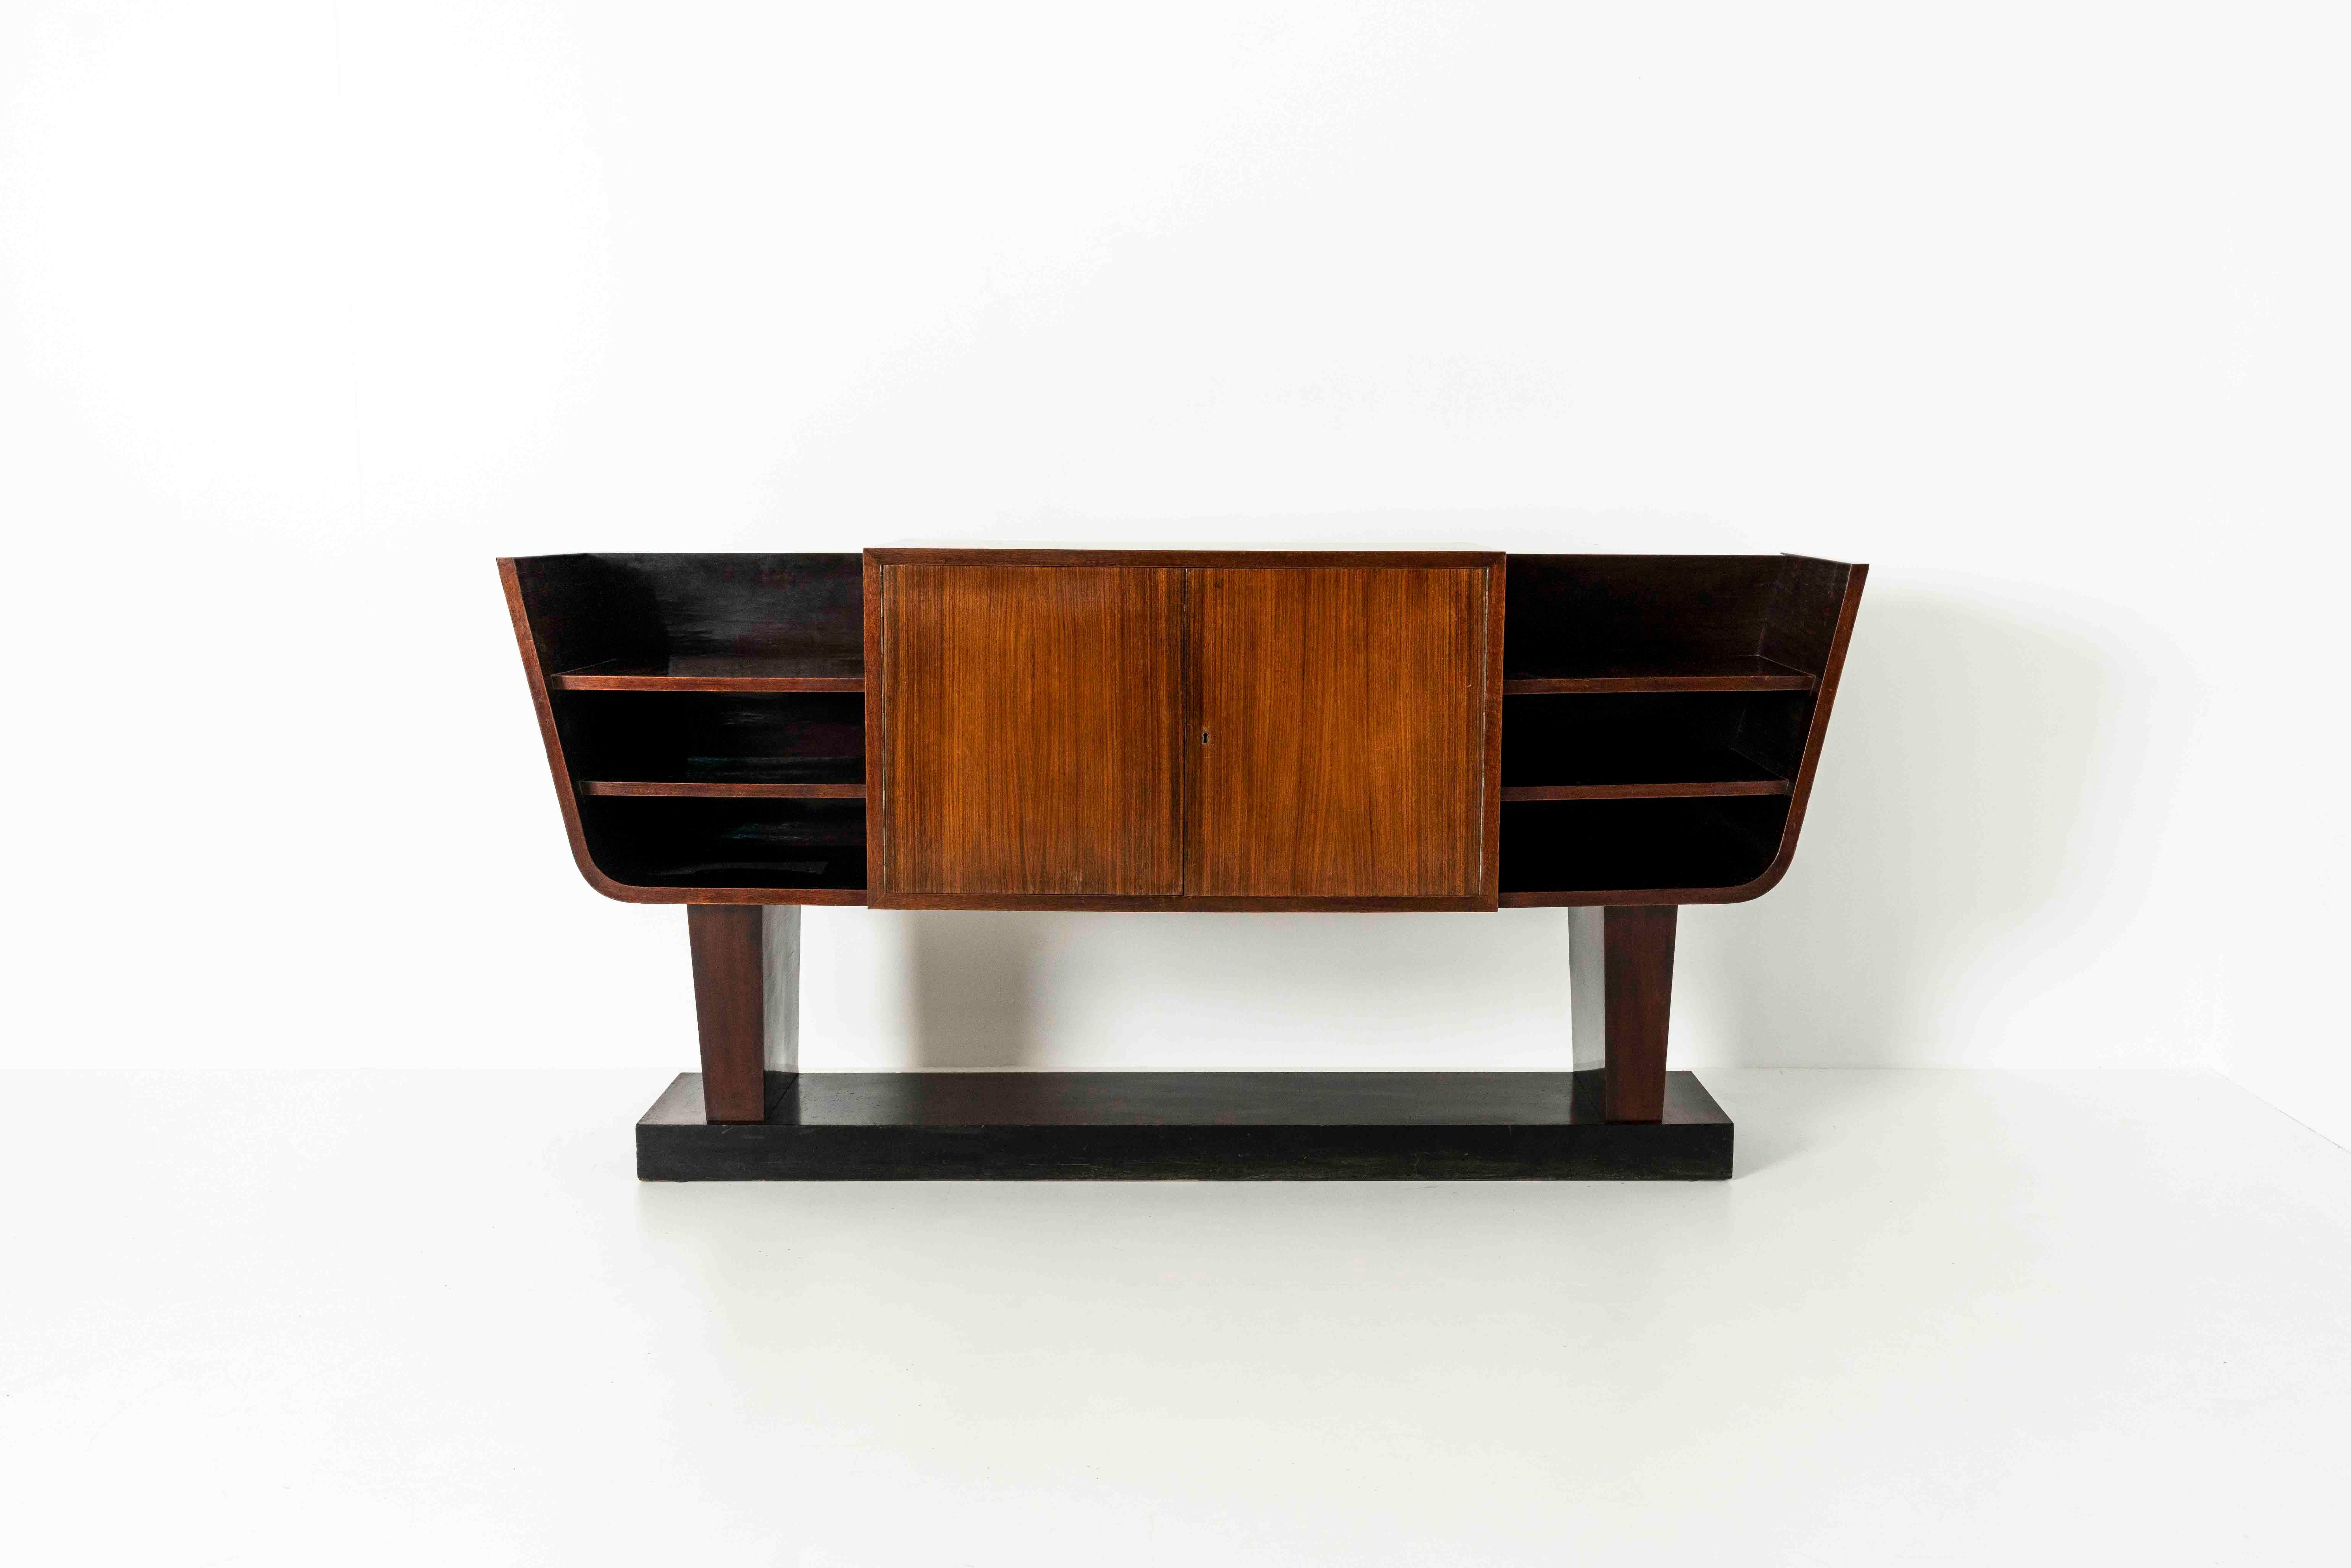 Impressive and large Italian Art Deco Credenza. This unique piece is a mix between a credenza and a console. It features two doors in the middle leading to a shelve that is open on both sides. Highly decorative, yet functional. We especially love